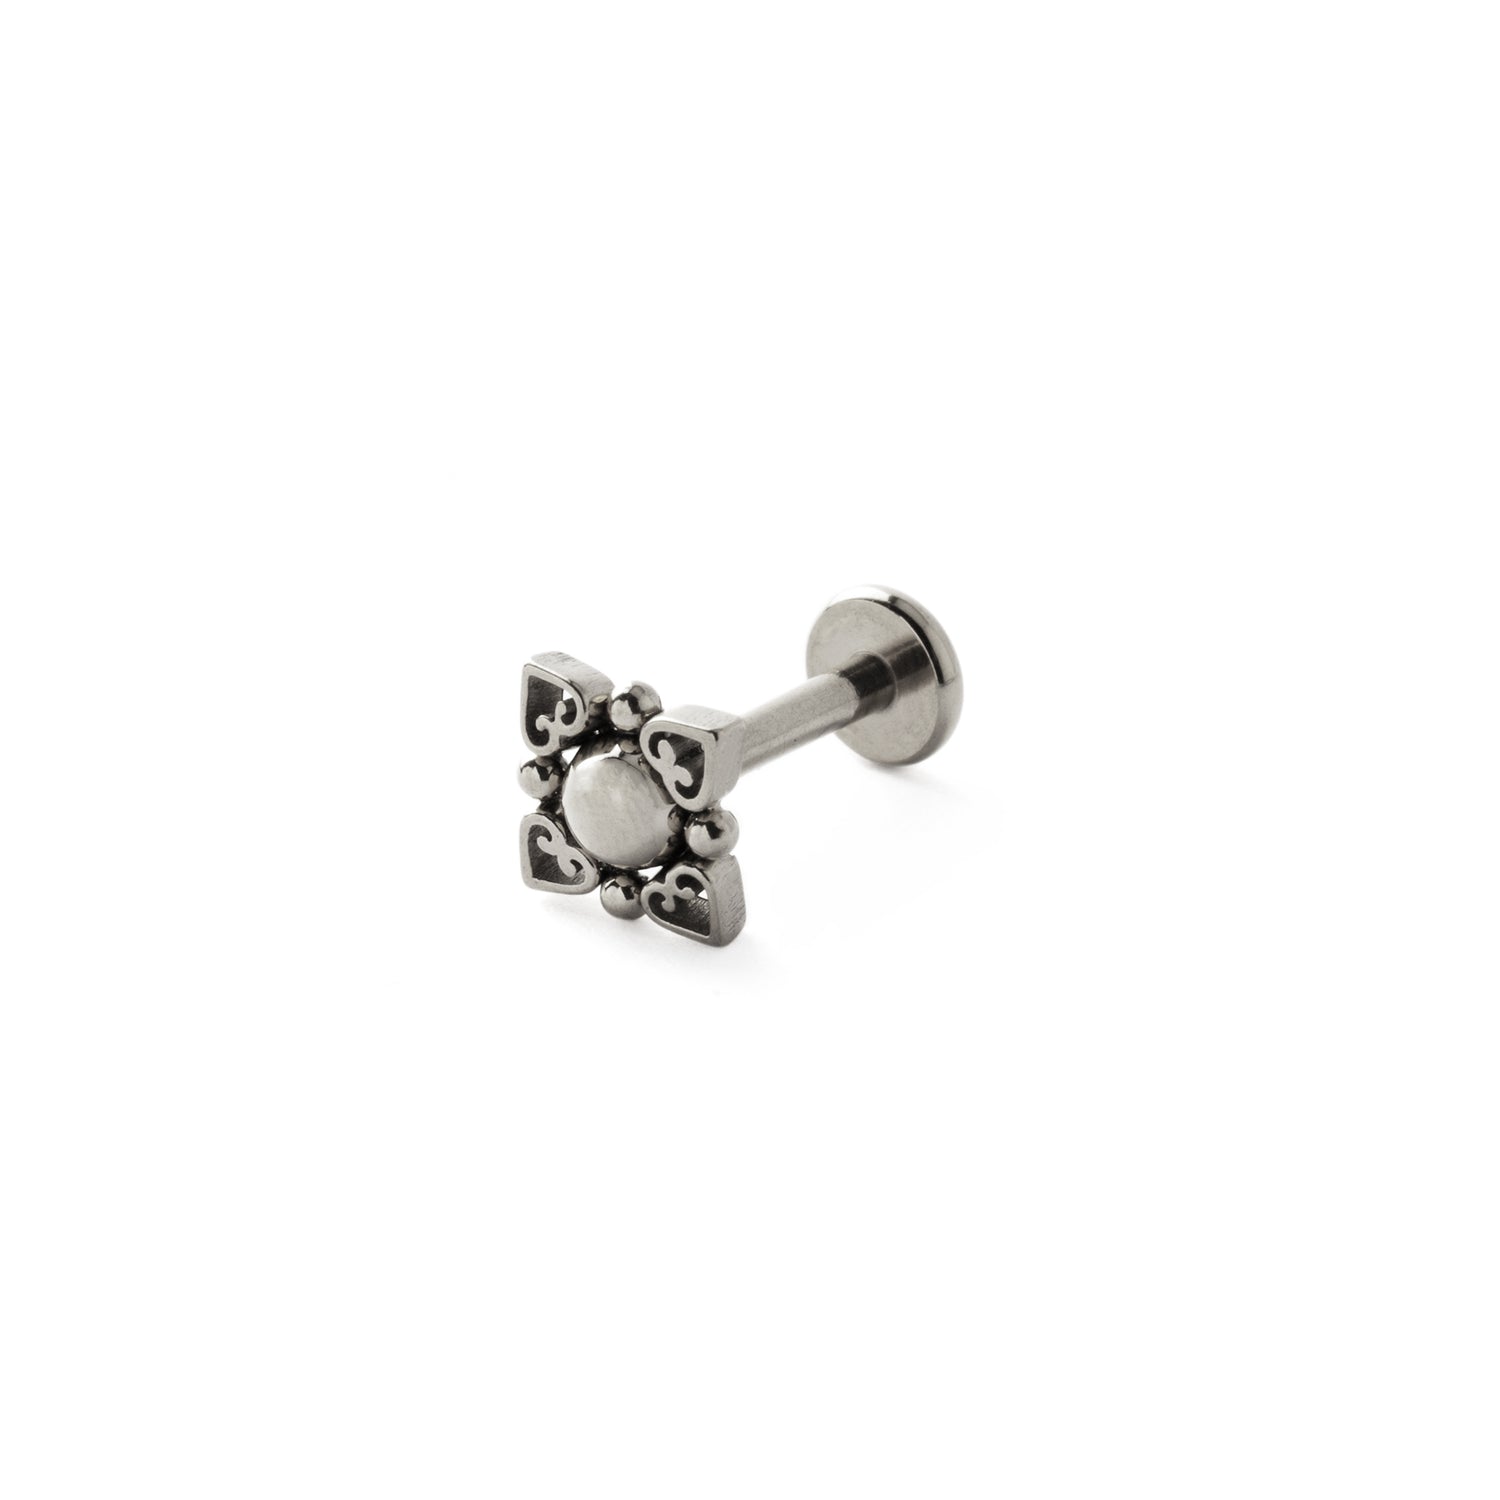 Neptune surgical steel internally threaded Labret stud left side view